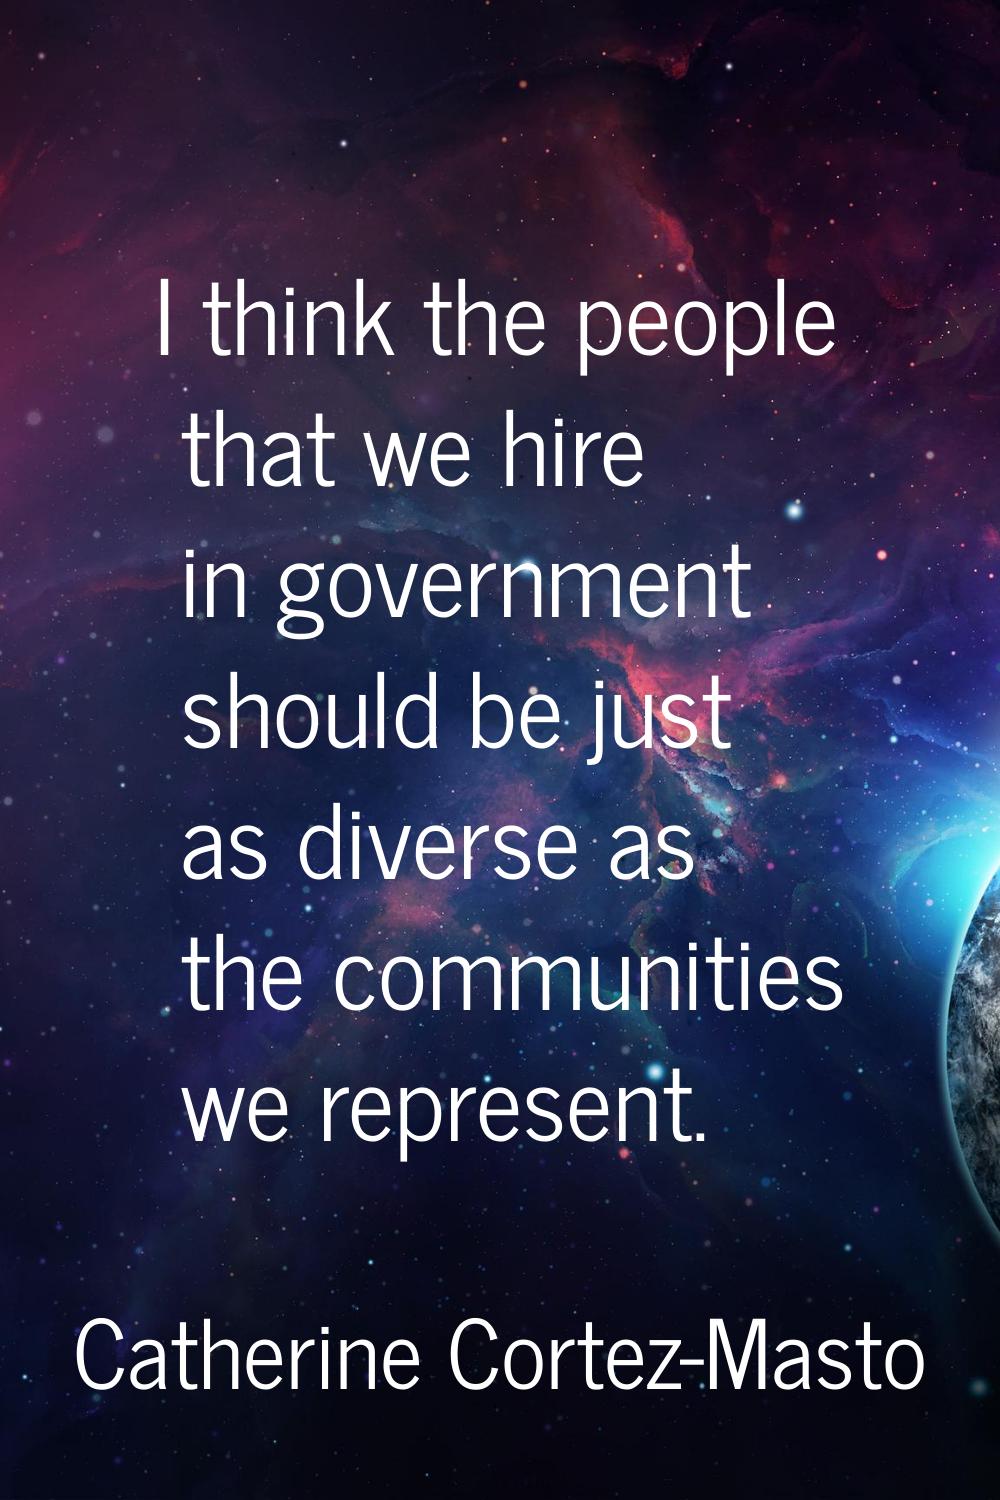 I think the people that we hire in government should be just as diverse as the communities we repre